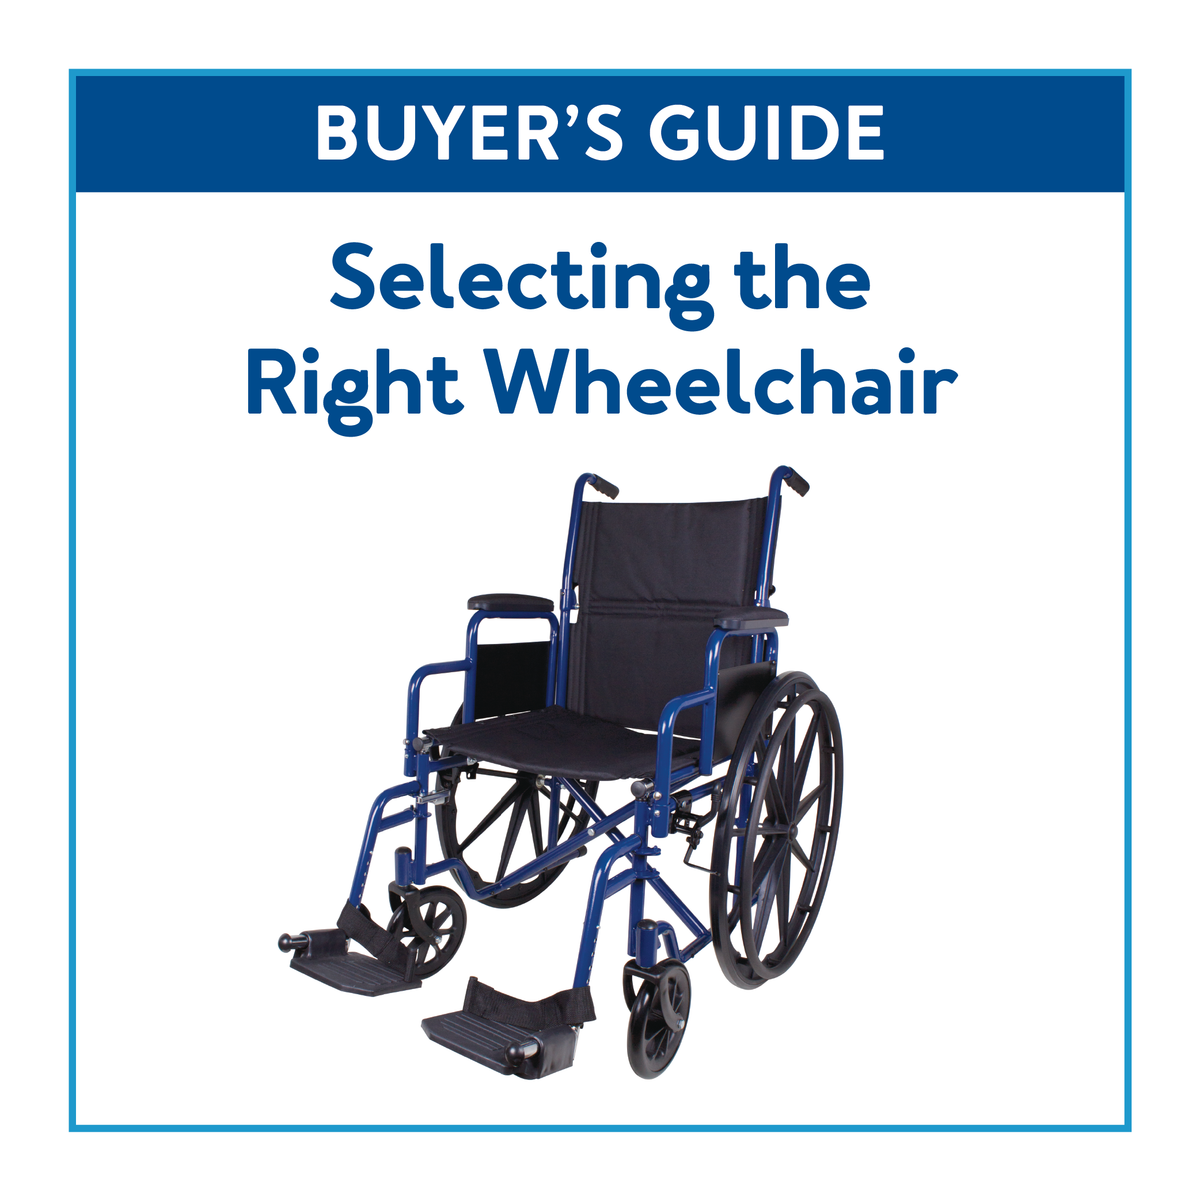 A wheelchair with text, “Buyer’s Guide: Selecting the Right Wheelchair”